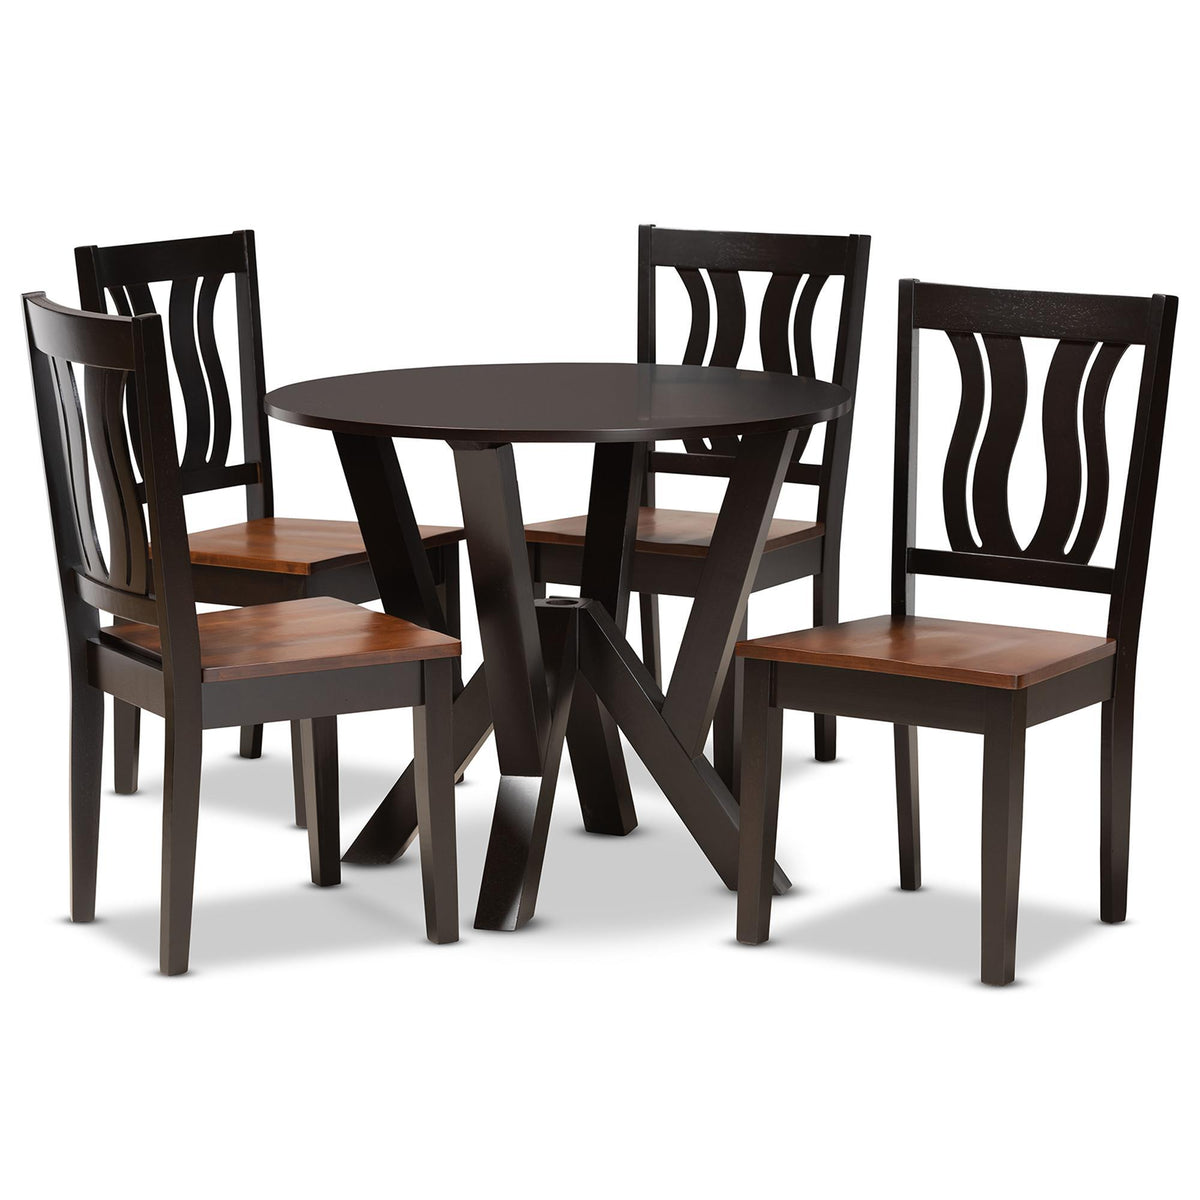 Baxton Studio Noelia Modern And Contemporary Transitional Two-Tone Dark Brown And Walnut Brown Finished Wood 5-Piece Dining Set - Noelia-Dark Brown/Walnut-5PC Dining Set